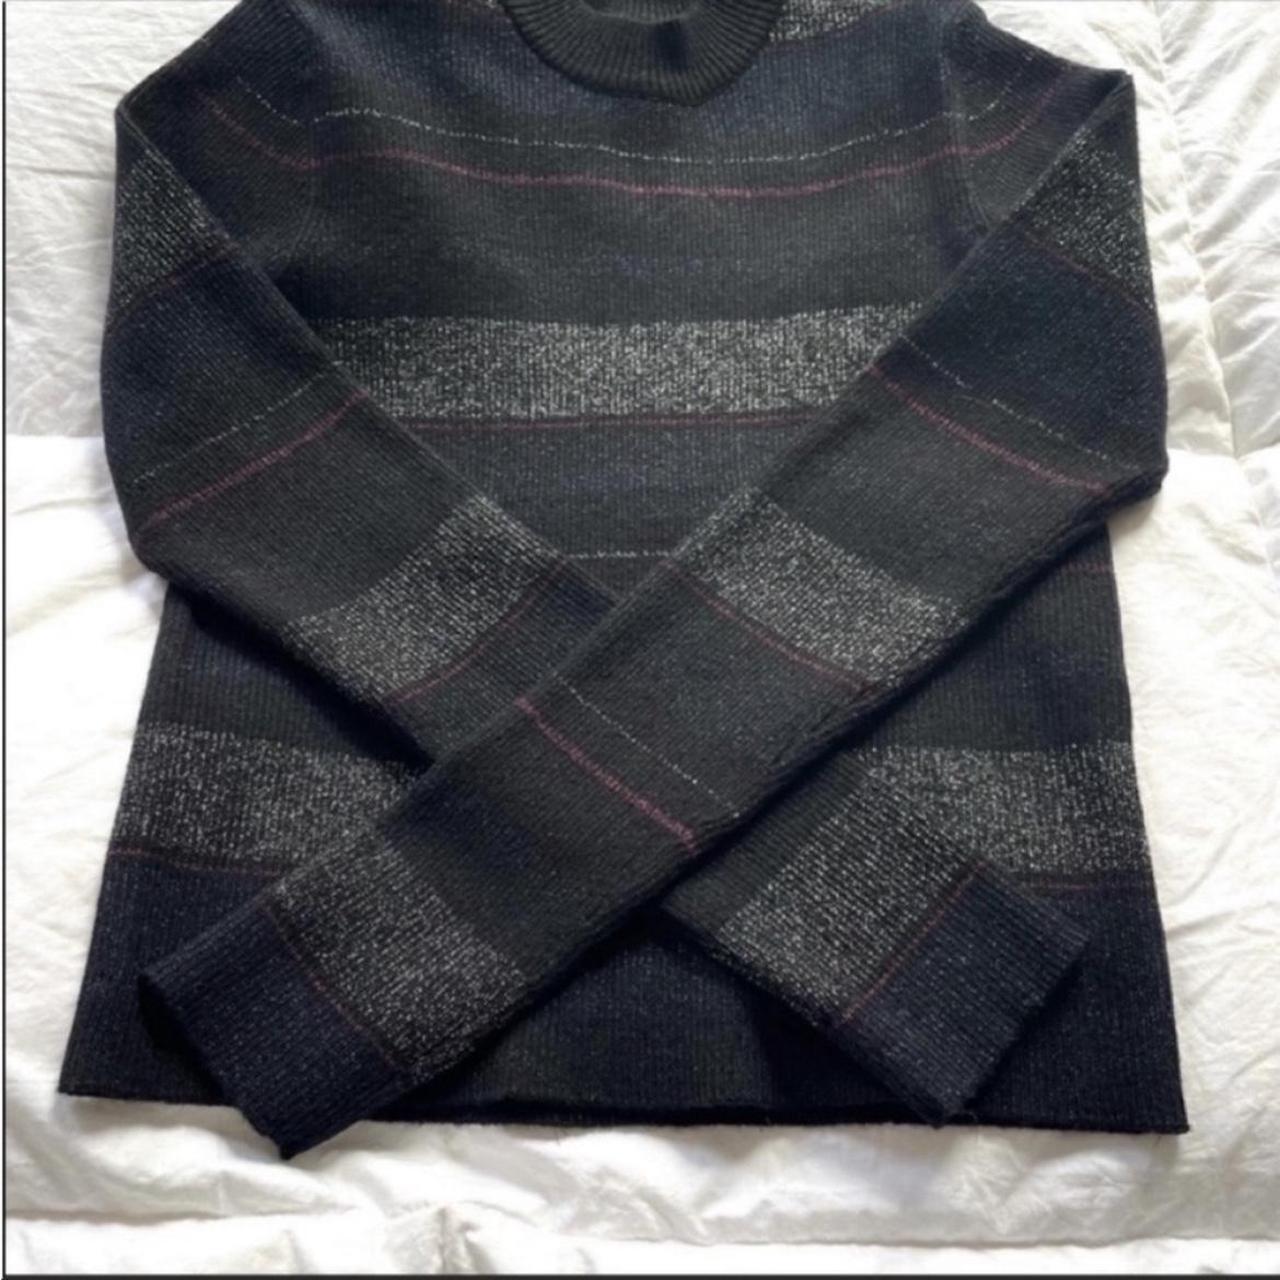 House of Harlow Women's Black and Silver Jumper (4)